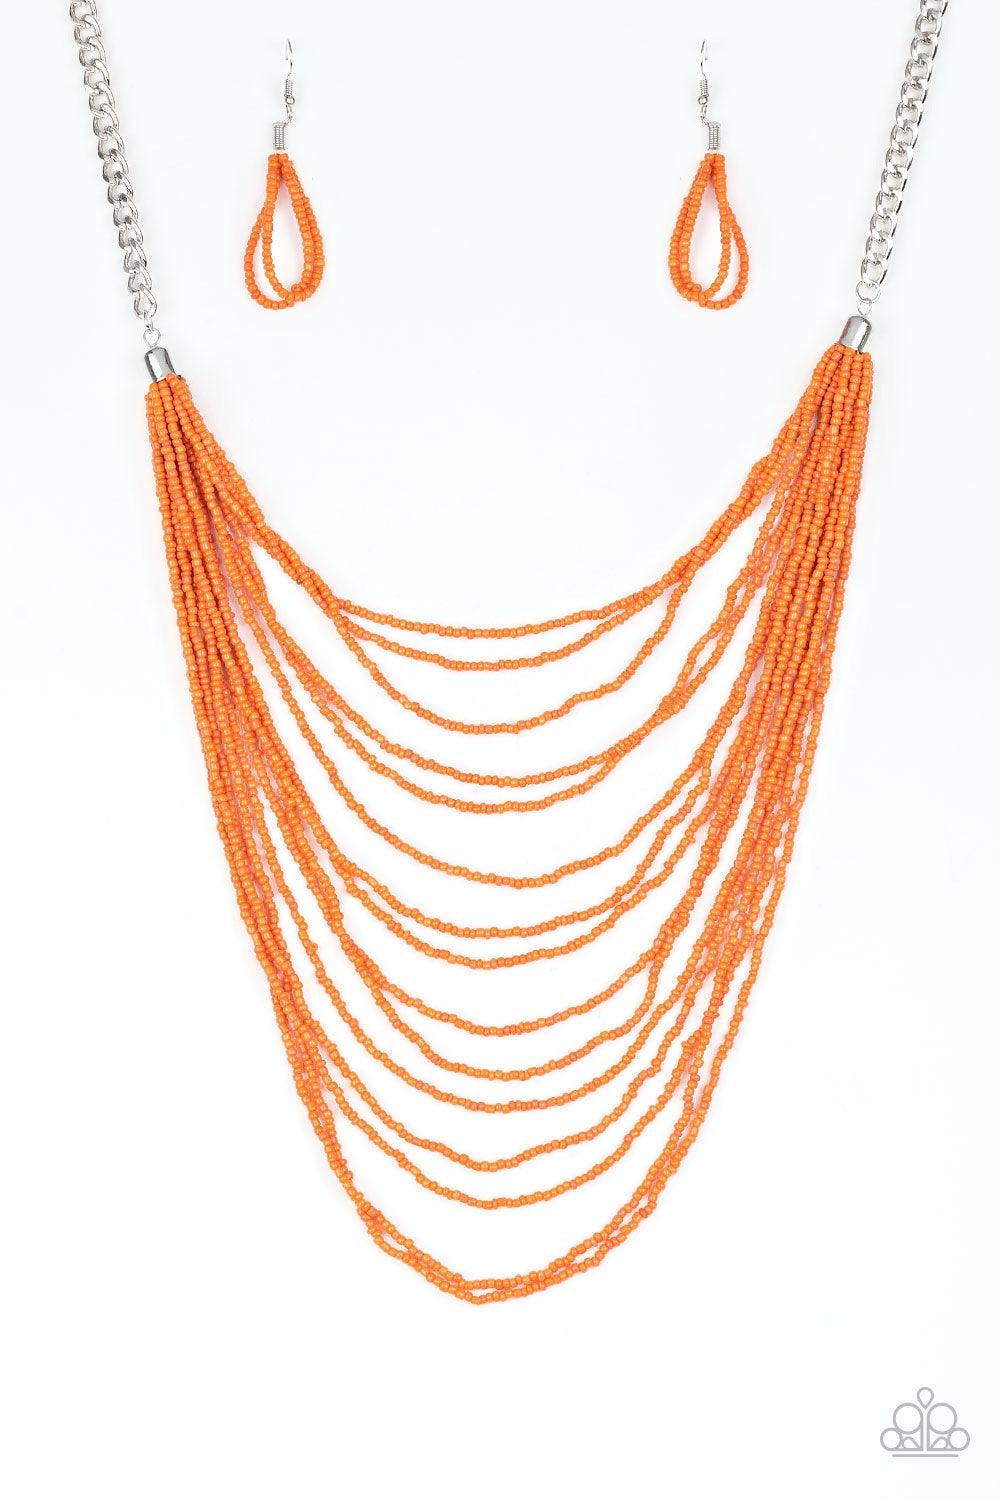 Paparazzi Accessories Bora Bombora - Orange Row after row of vivacious orange seed beads cascade down the chest, creating summery layers. Features an adjustable clasp closure. Jewelry